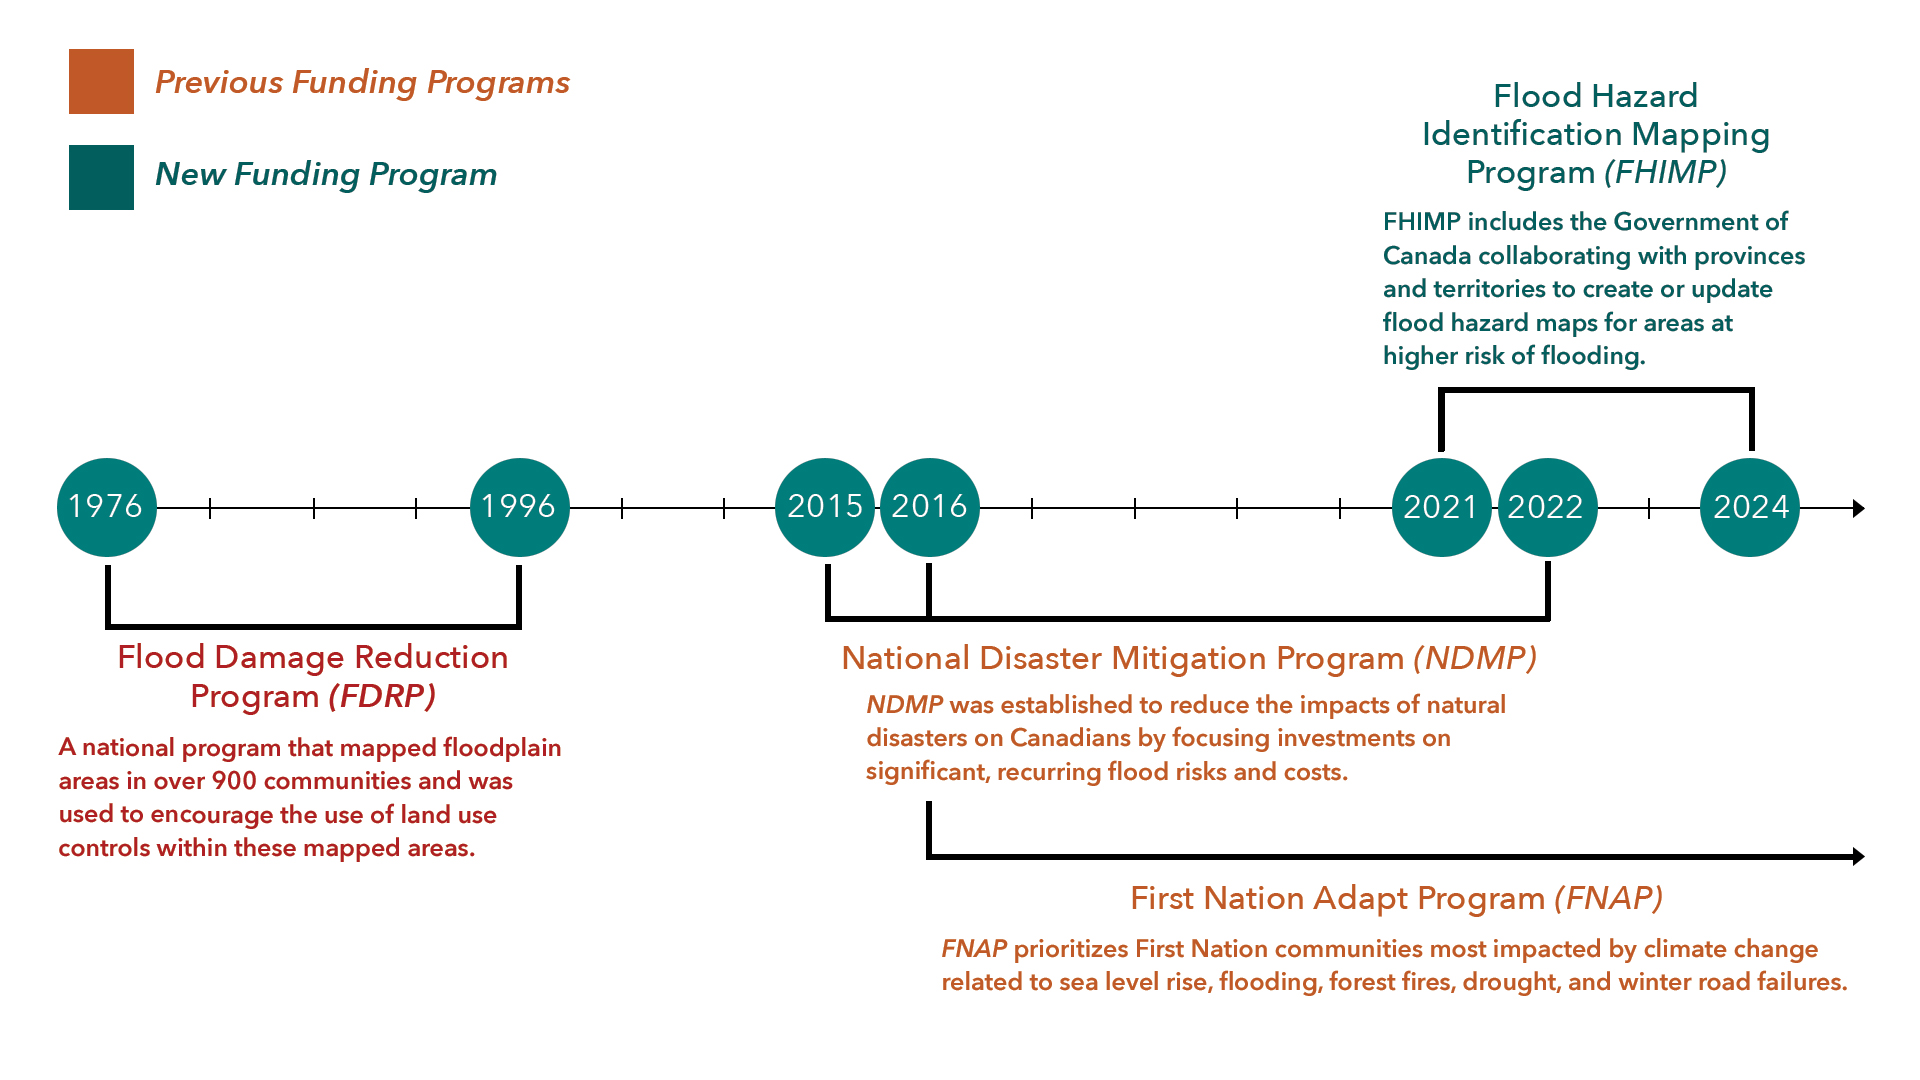 A timeline demonstrating the years different flood mapping related programs have been active with brief descriptions.From 1976 until 1996, the Flood Damage Reduction Program (FDRP) was in place. It was a national program that created flood maps in over 900 communities and was used to encourage the use of land use controls within these mapped areas.From 2016 onward, the First Nations Adapt Program (FNAP) funds adaptation activities for First Nation communities south of 60 who are greatly impacted by climate change. The program provides support for community-led, needs-based, adaptation projects like risk assessments, cost benefit analysis of adaptation options, and flood mapping.From 2016 until 2022, the National Disaster Mitigation Program (NDMP) was established to reduce the impacts of natural disasters on Canadians by focusing investments on significant, recurring flood risks and costs. Under NDMP, the four streams of funding included funding for the development/modernization of flood maps.From 2021 until 2024, the Flood Hazard Identification and Mapping Program (FHIMP) will be active. The Government of Canada is collaborating with provinces and territories to create or update flood hazard maps for areas at higher risk of flooding.